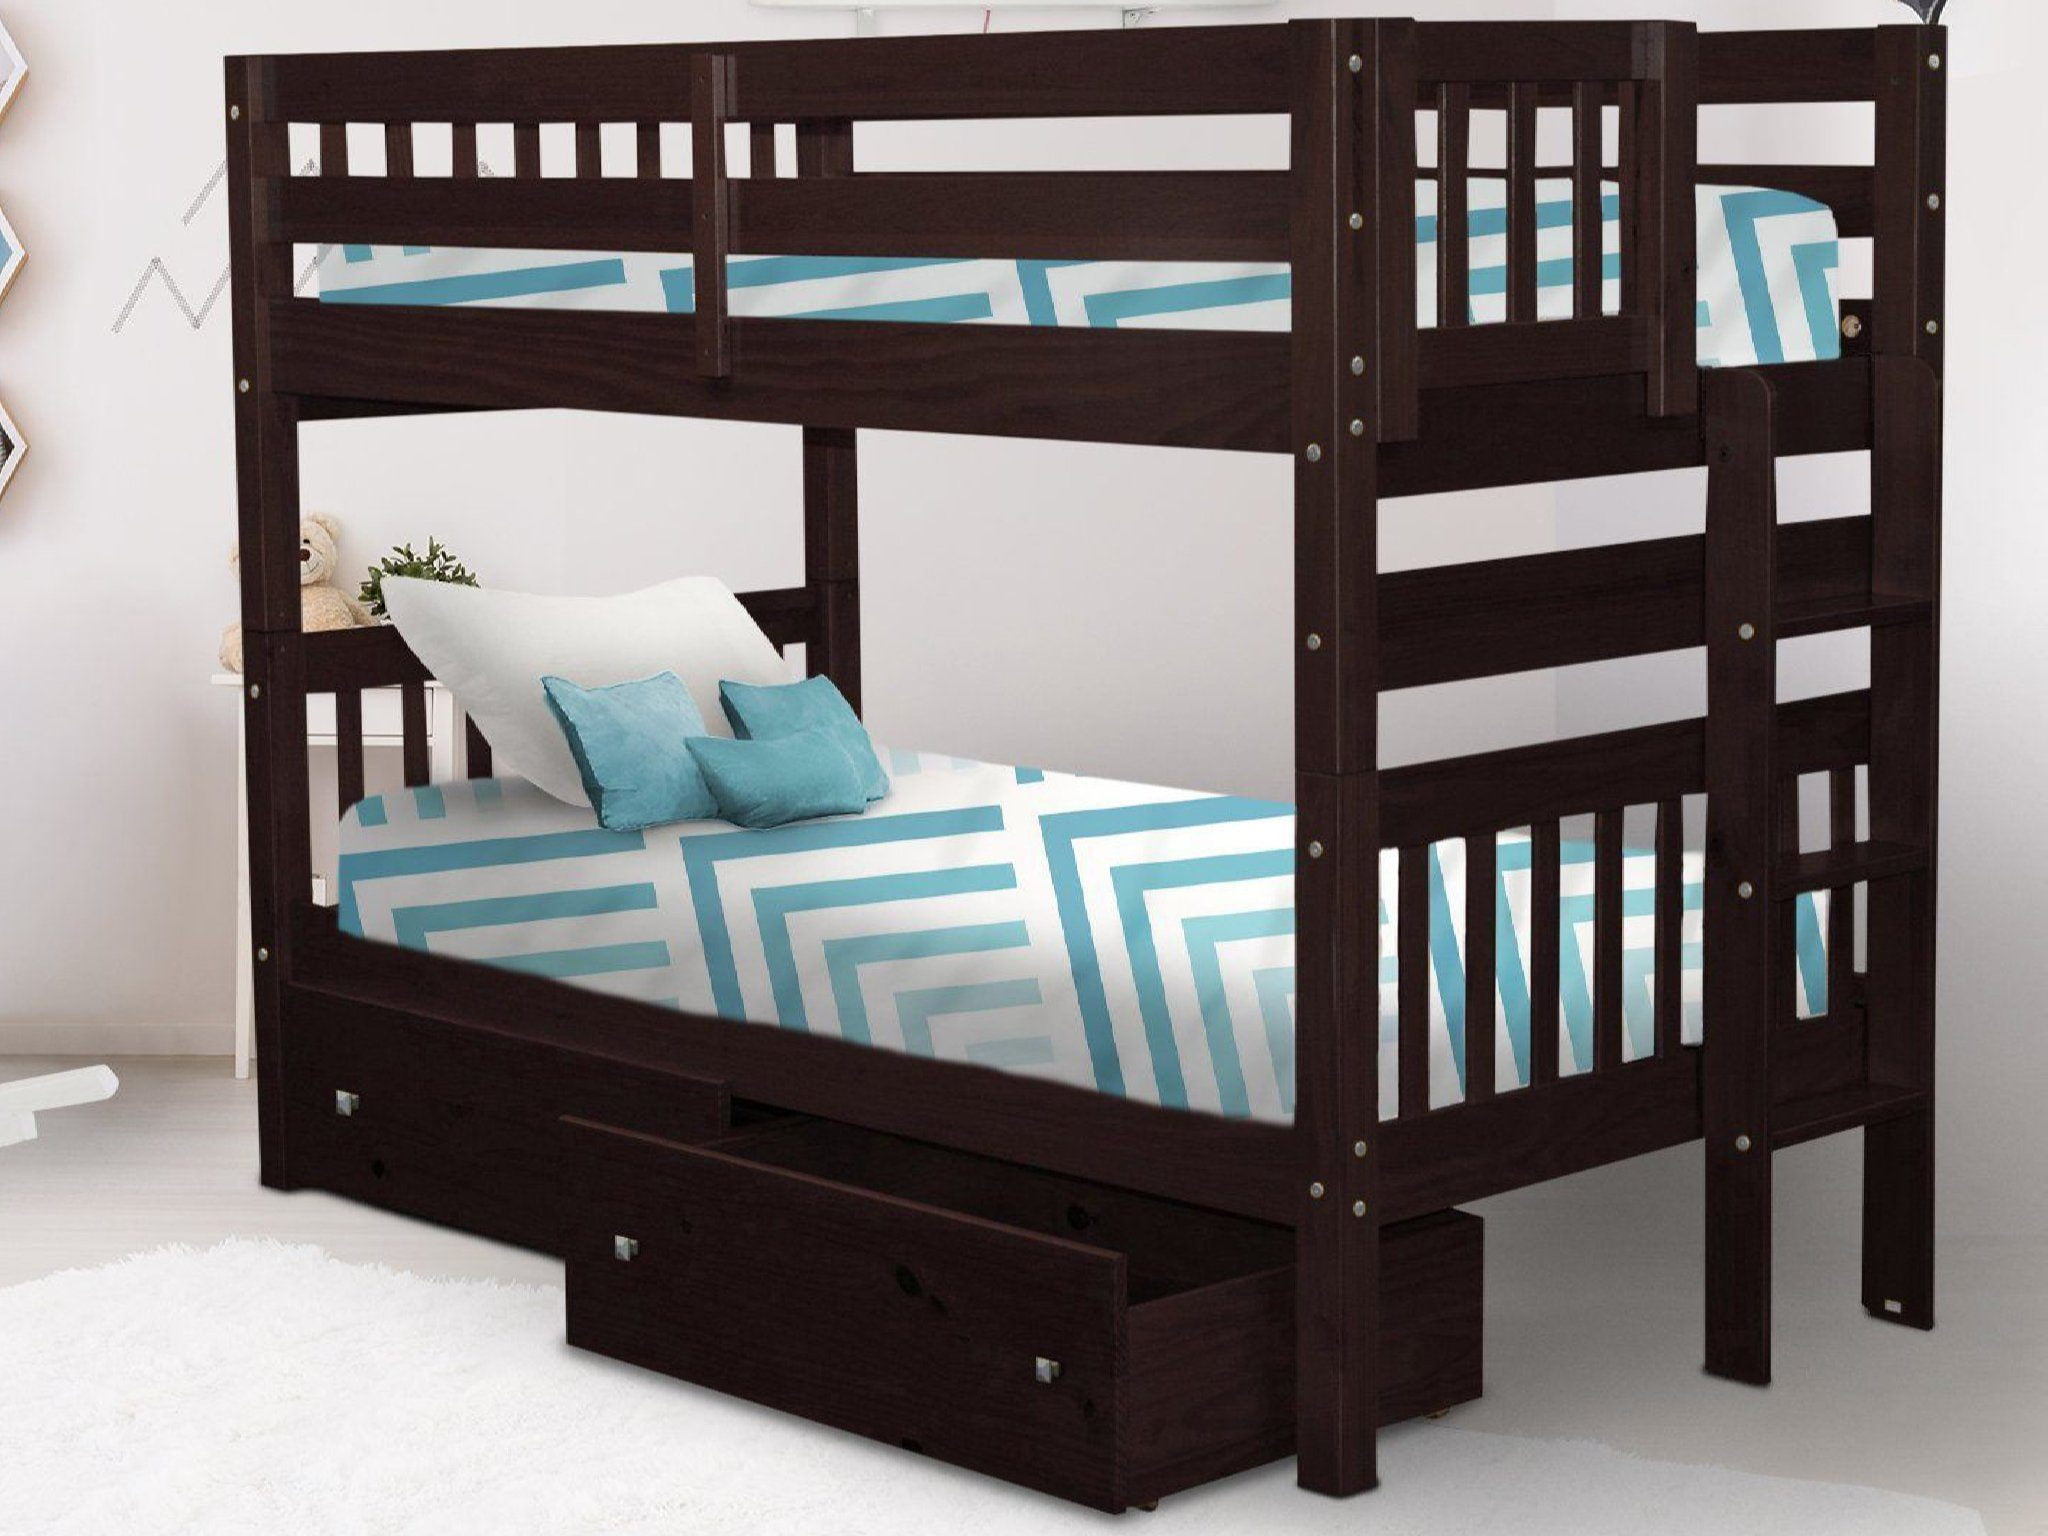 Bedz King Bunk Beds Twin Over With, Brazilian Pine Bunk Bed